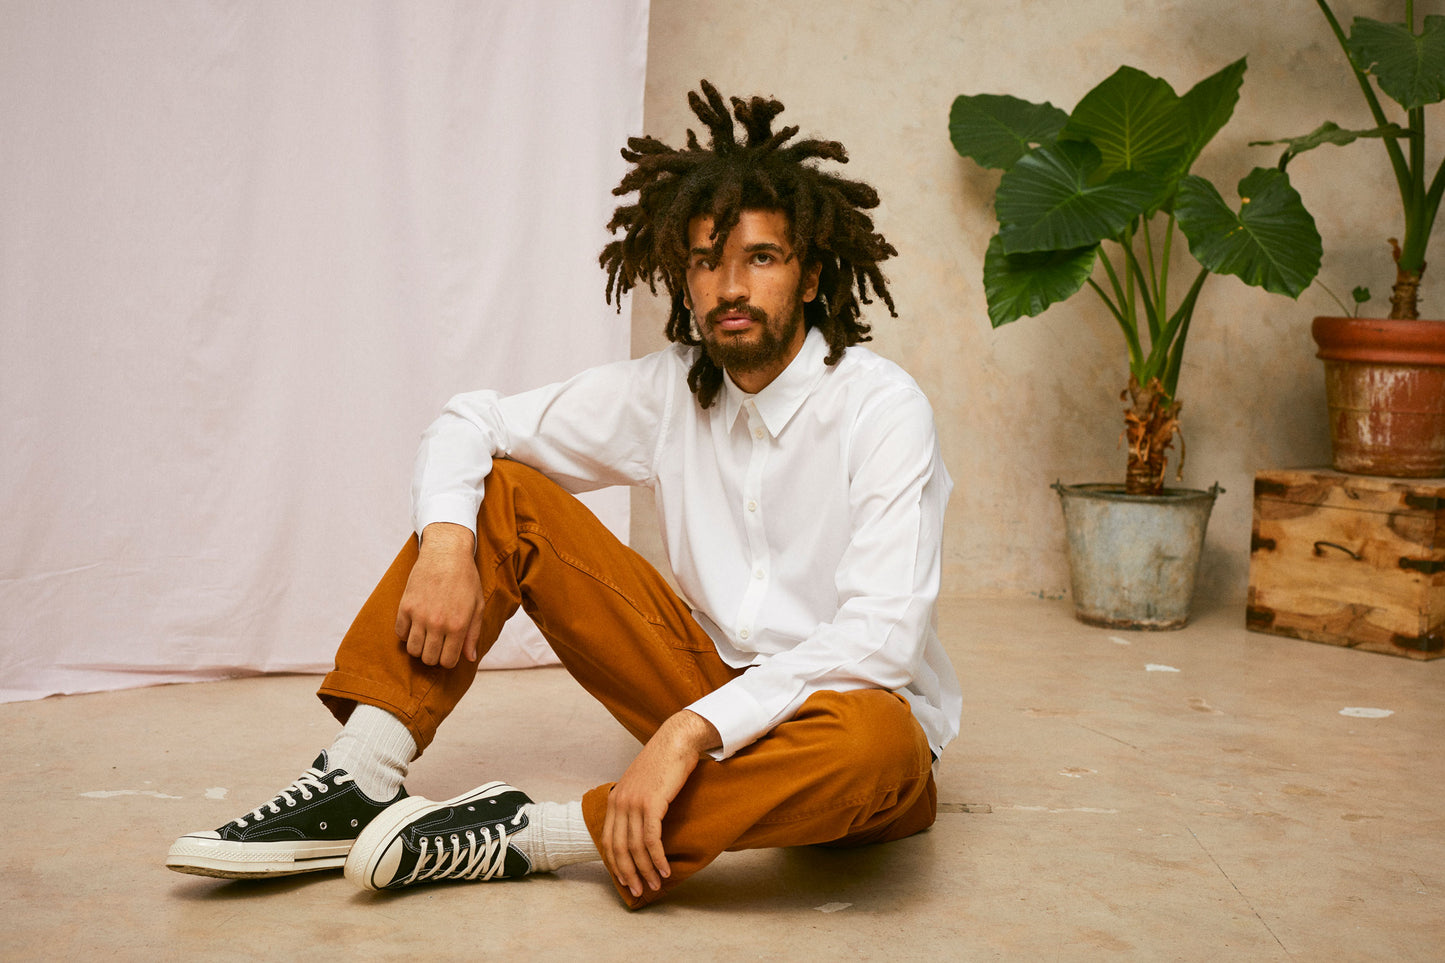 Model sits on the floor, with one knee up and his arm resting on his knee. He is wearing Saywood's Eddy Mens mens white Shirt. Worn with tabacco trousers and black Converse. A plant and drop of pink fabric can be seen in the background.